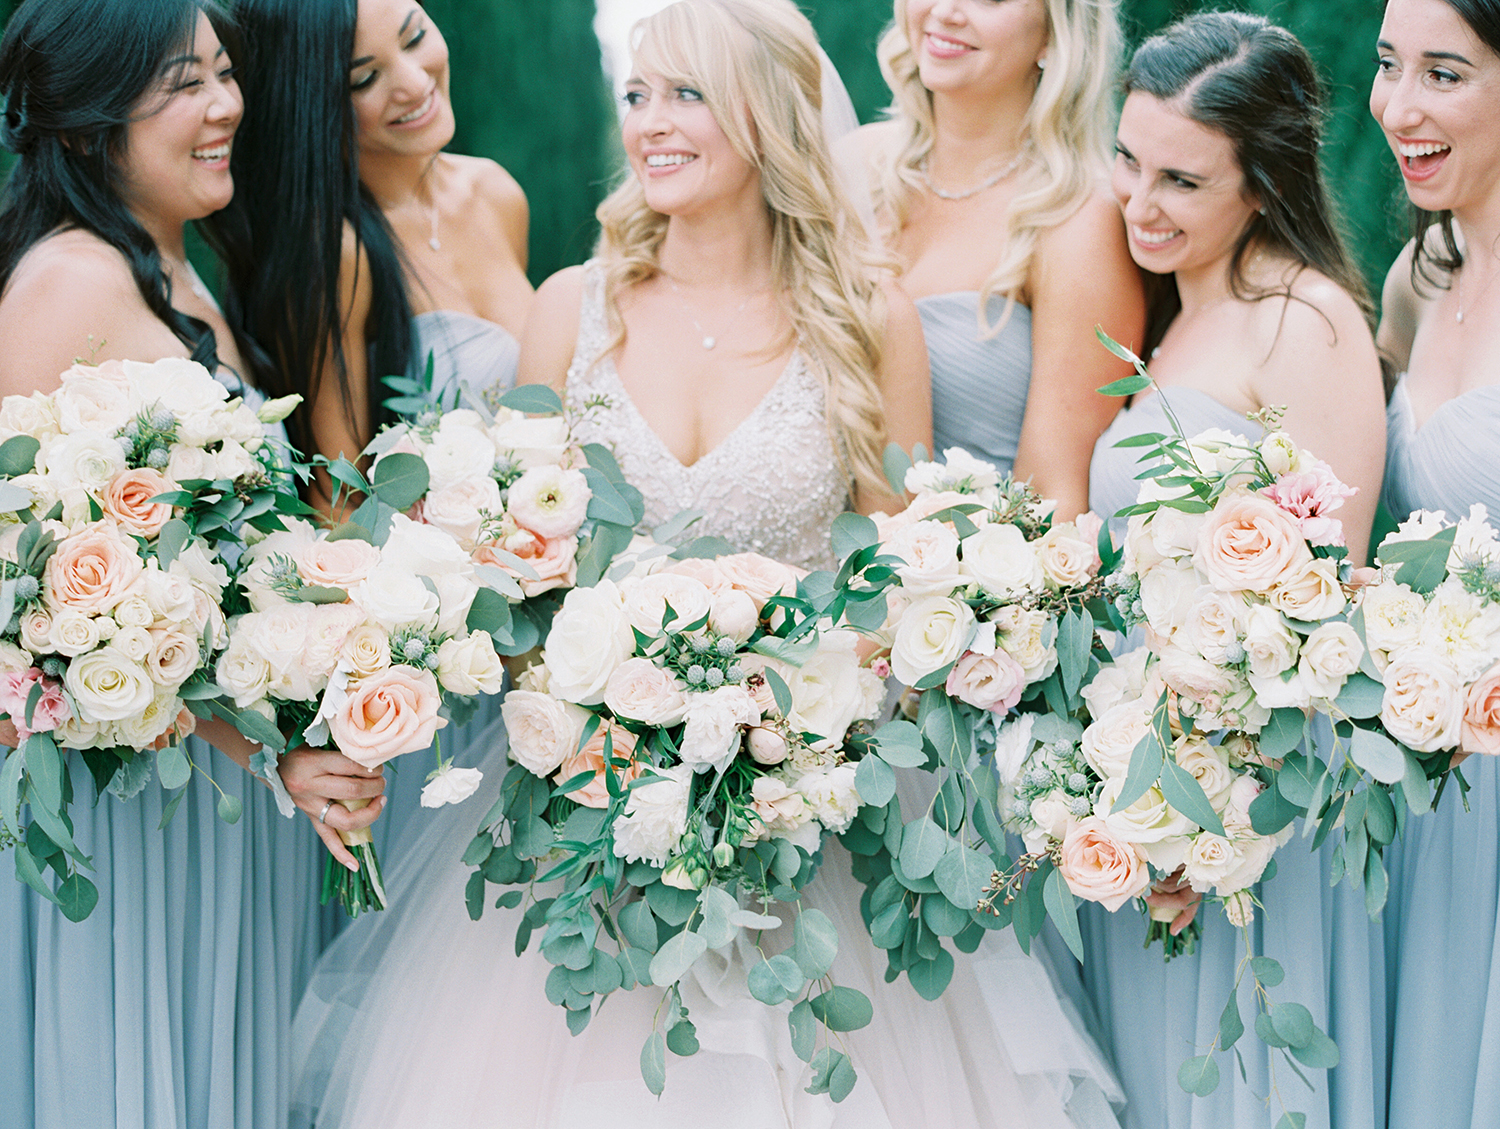 Gloriana and Eric's Wedding at The Greystone Mansion with light blue dresses and eucalyptus bouquets